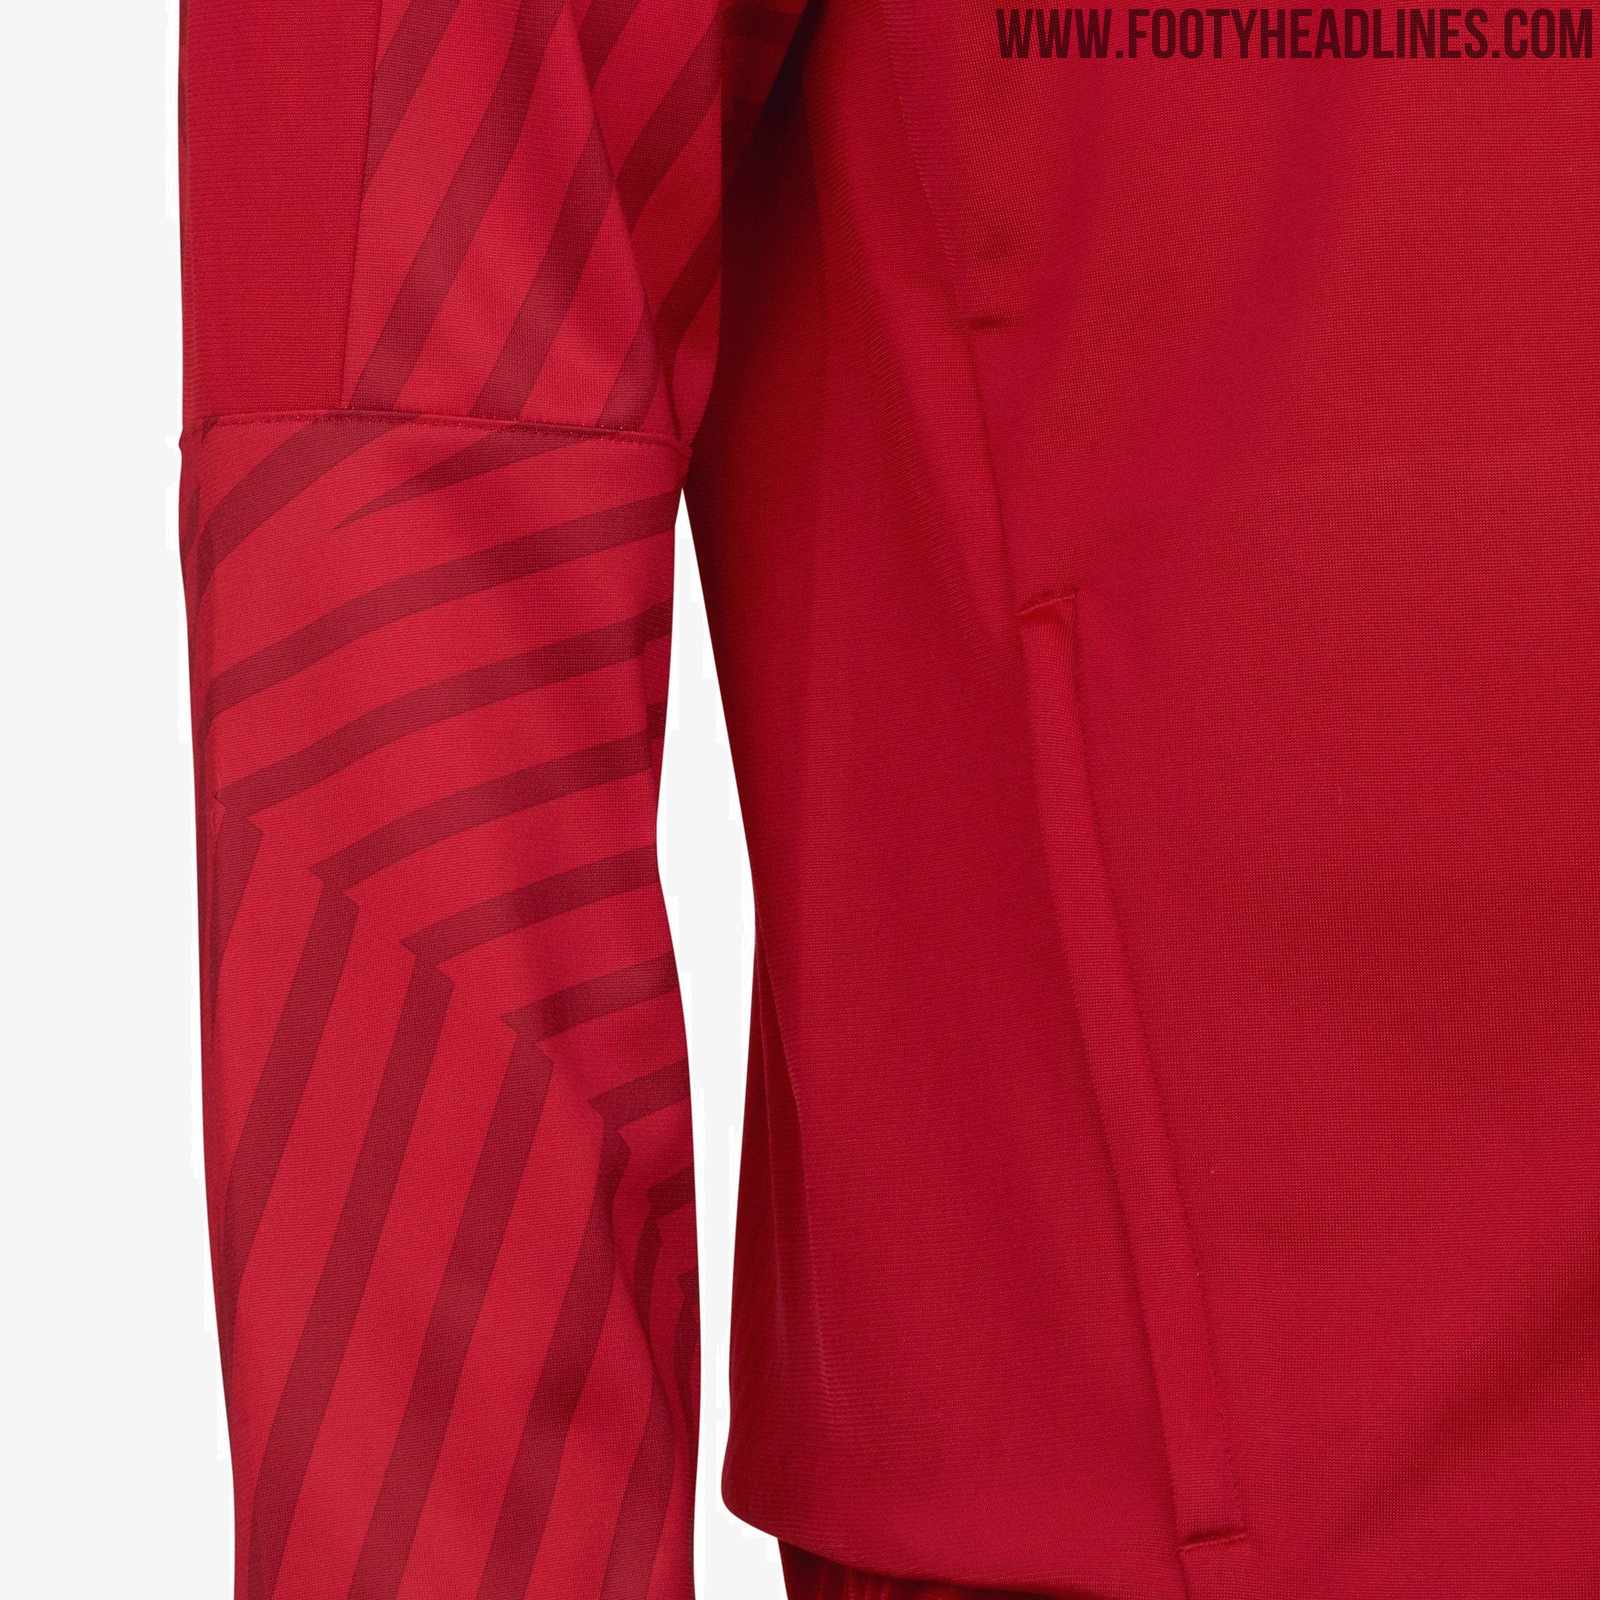 Arsenal 18-19 Home Anthem Jacket and Pre-Match Shirt Released - Footy ...